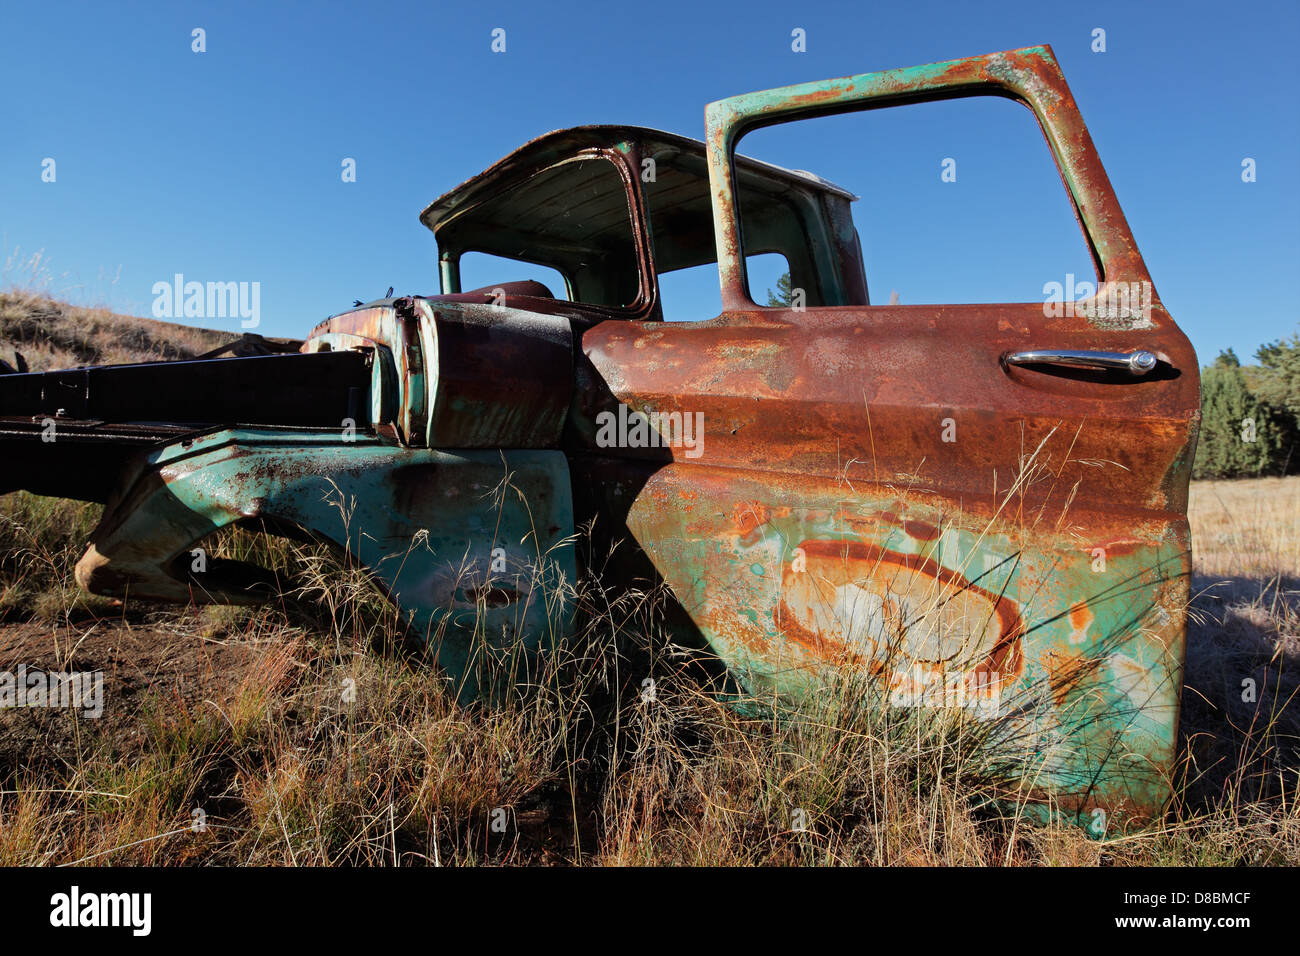 Wreck of a rusty old pickup truck out in the field Stock Photo